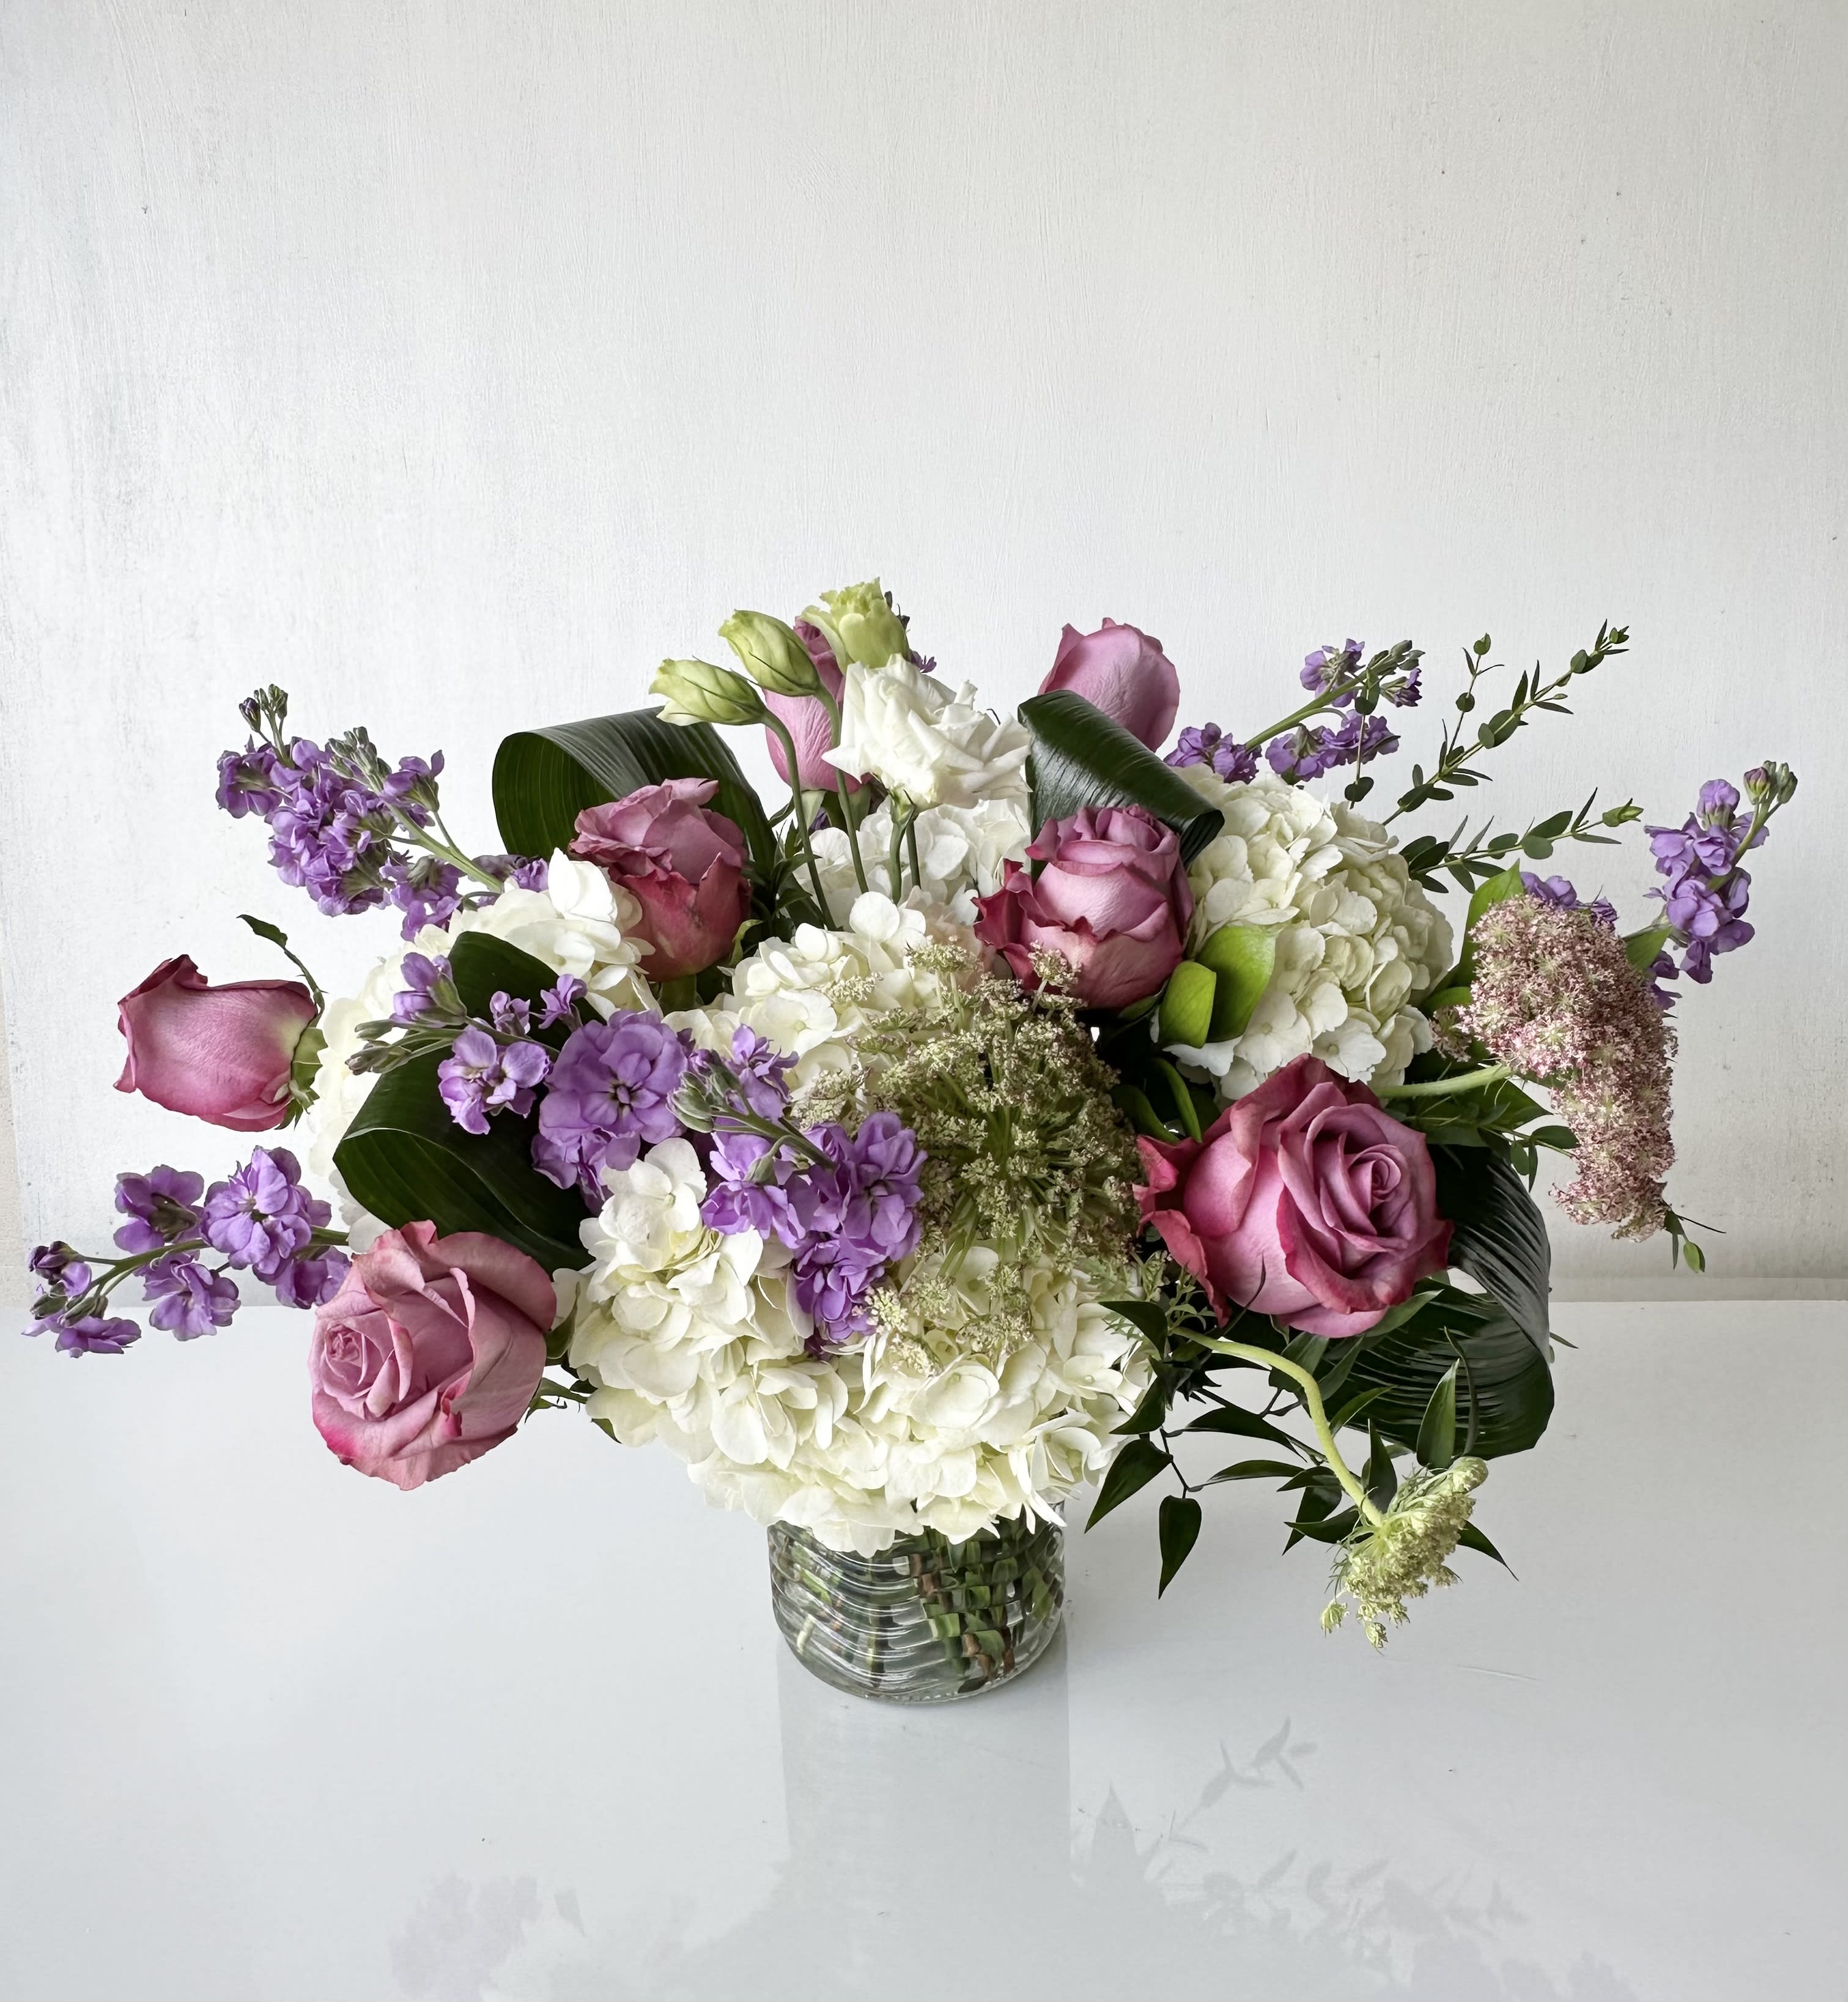 Polina - An arrangement of white hydrangeas, purple roses, lavender stock, and queen ann's lace with various greens in a glass vase.  Dimensions: Approximately 18&quot; H x 24&quot; W